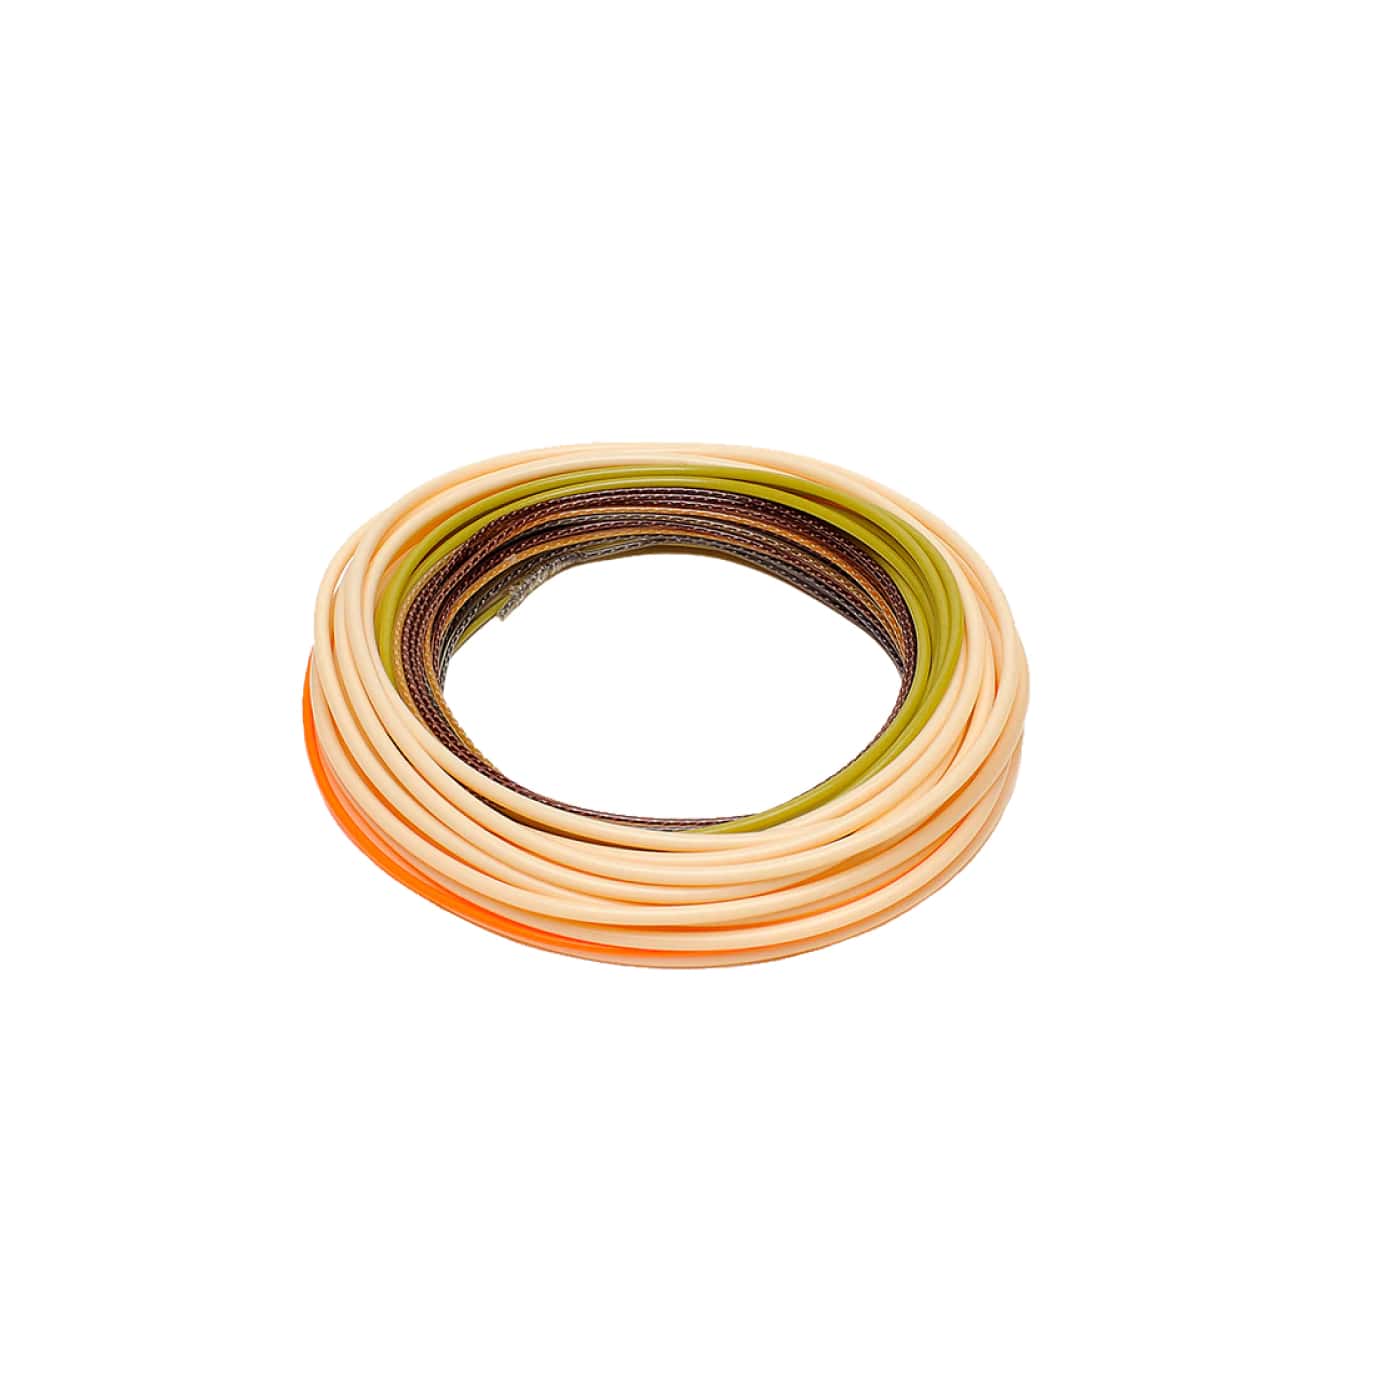 RIO Intouch Scandi 3D Fly Line · Boyne Country Sports